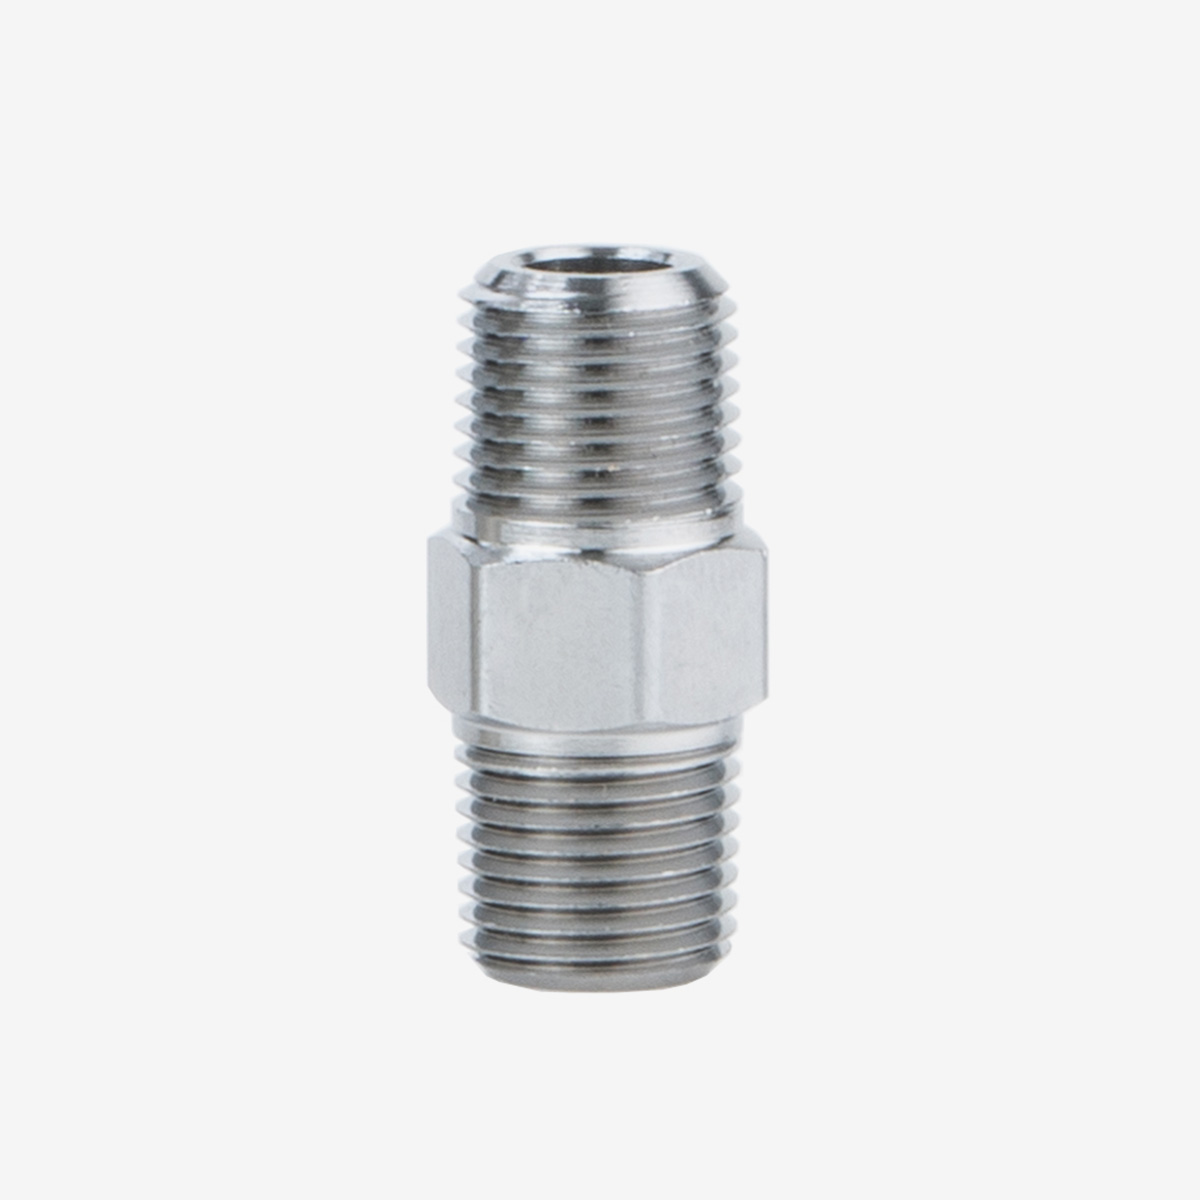 Silver 1/8th inch fitting hex nipple for flow meter manifold on white background